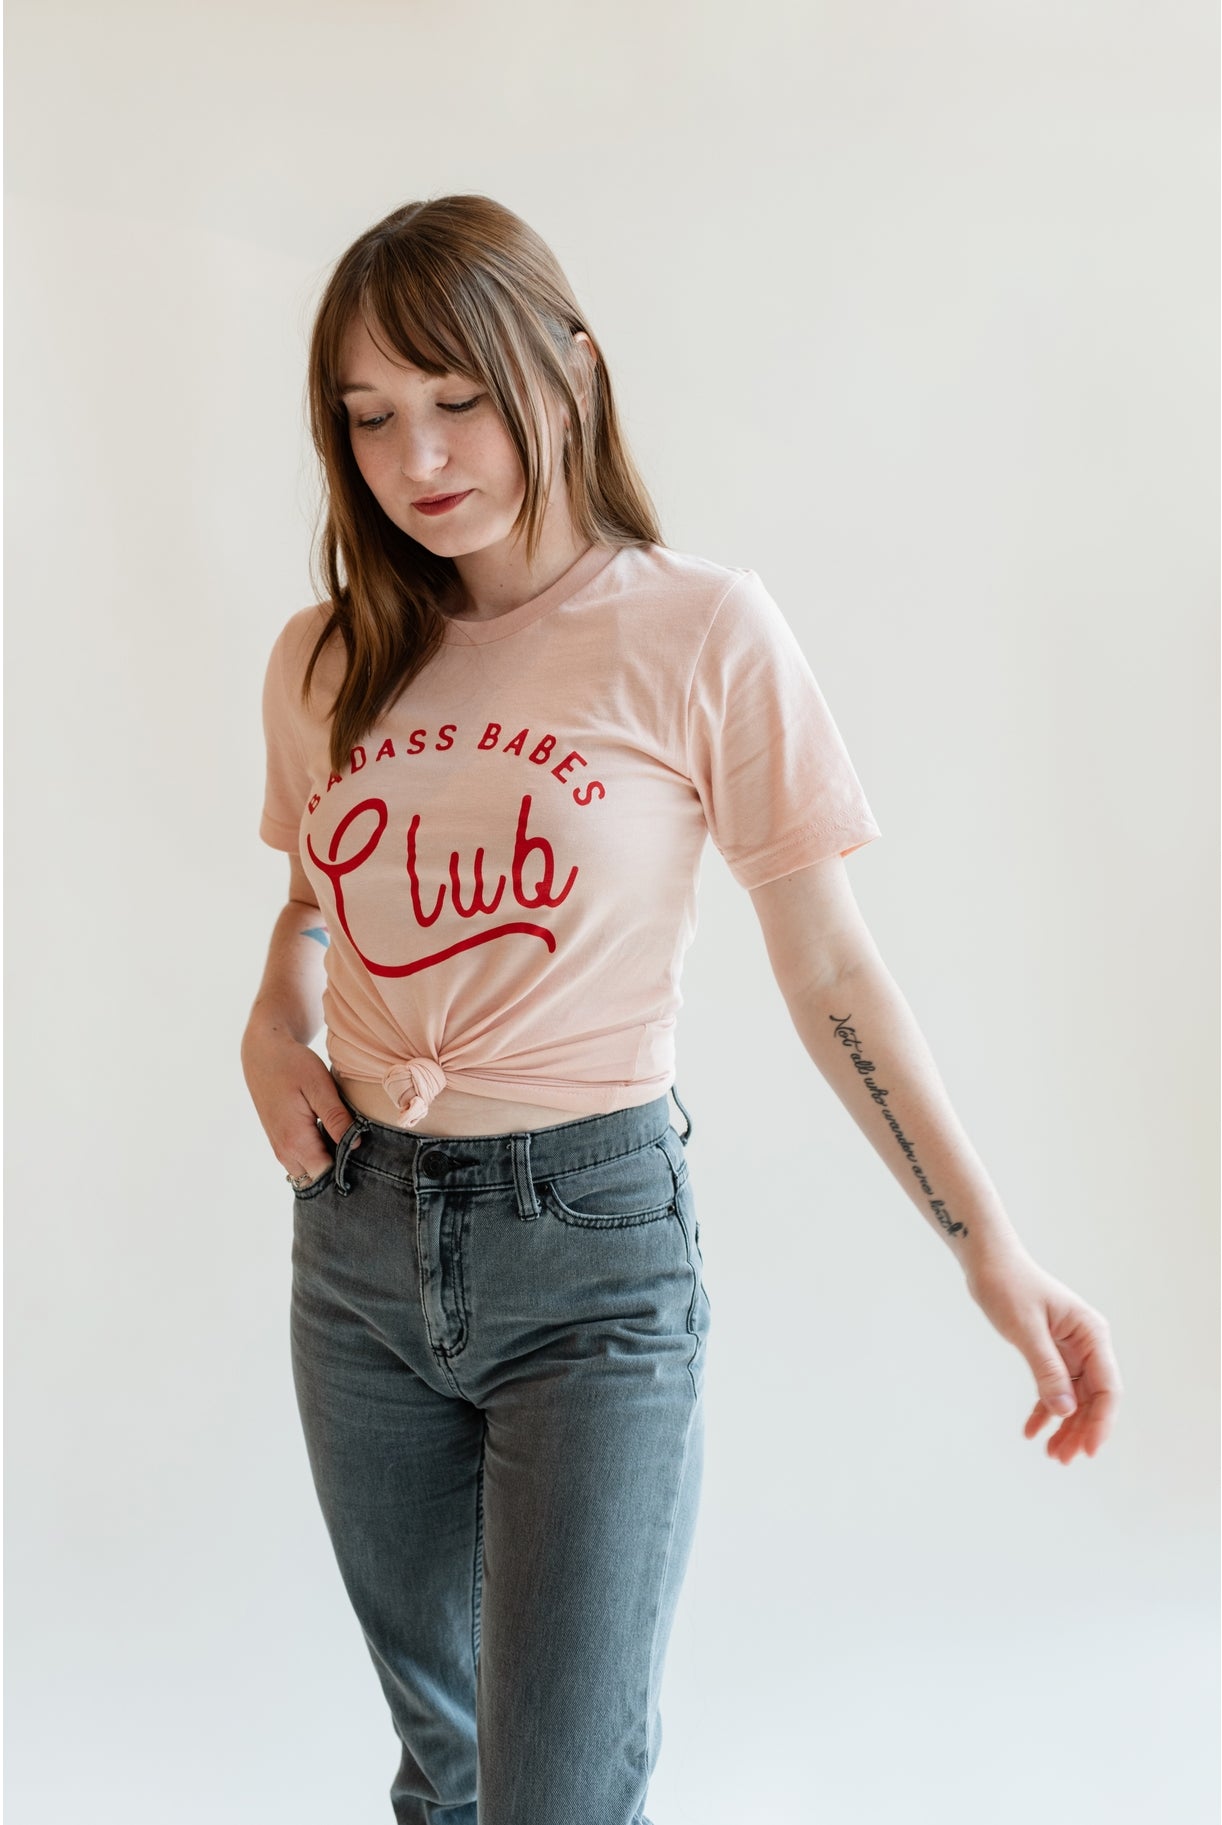 Badass Babes Club, Tee-Short Sleeves-Vixen Collection, Day Spa and Women's Boutique Located in Seattle, Washington